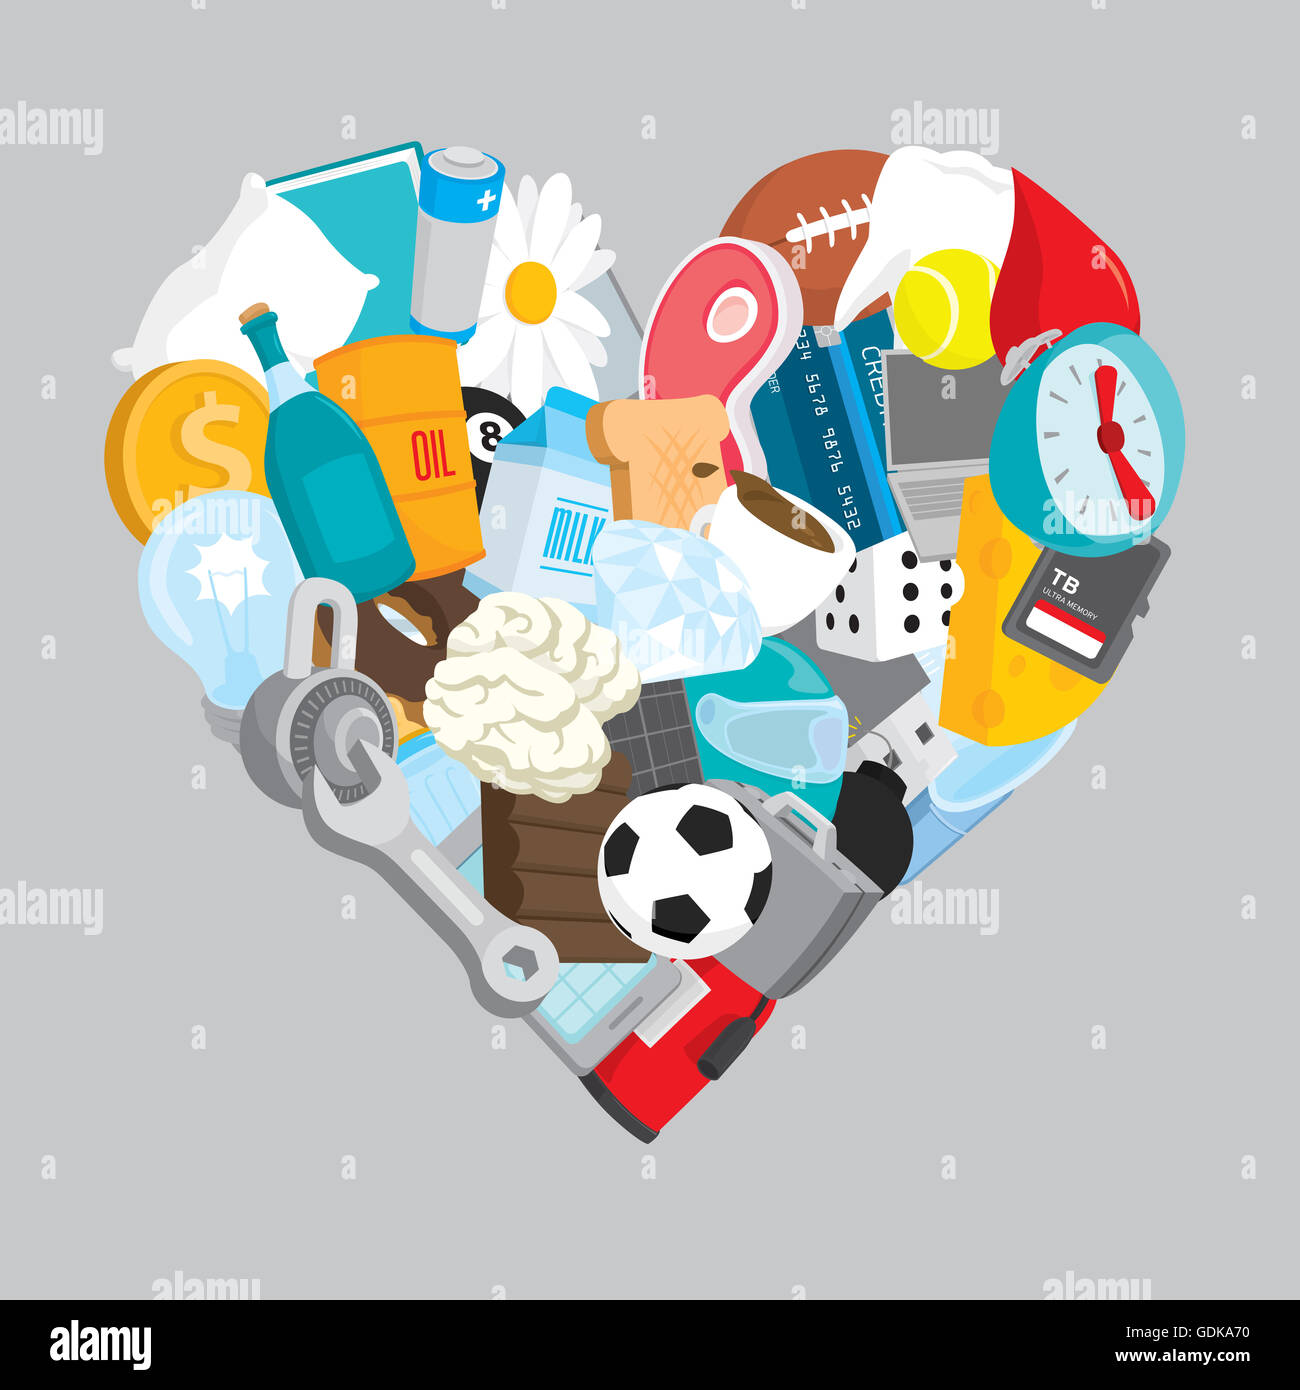 Cartoon illustration of different objects filling a heart Stock Photo